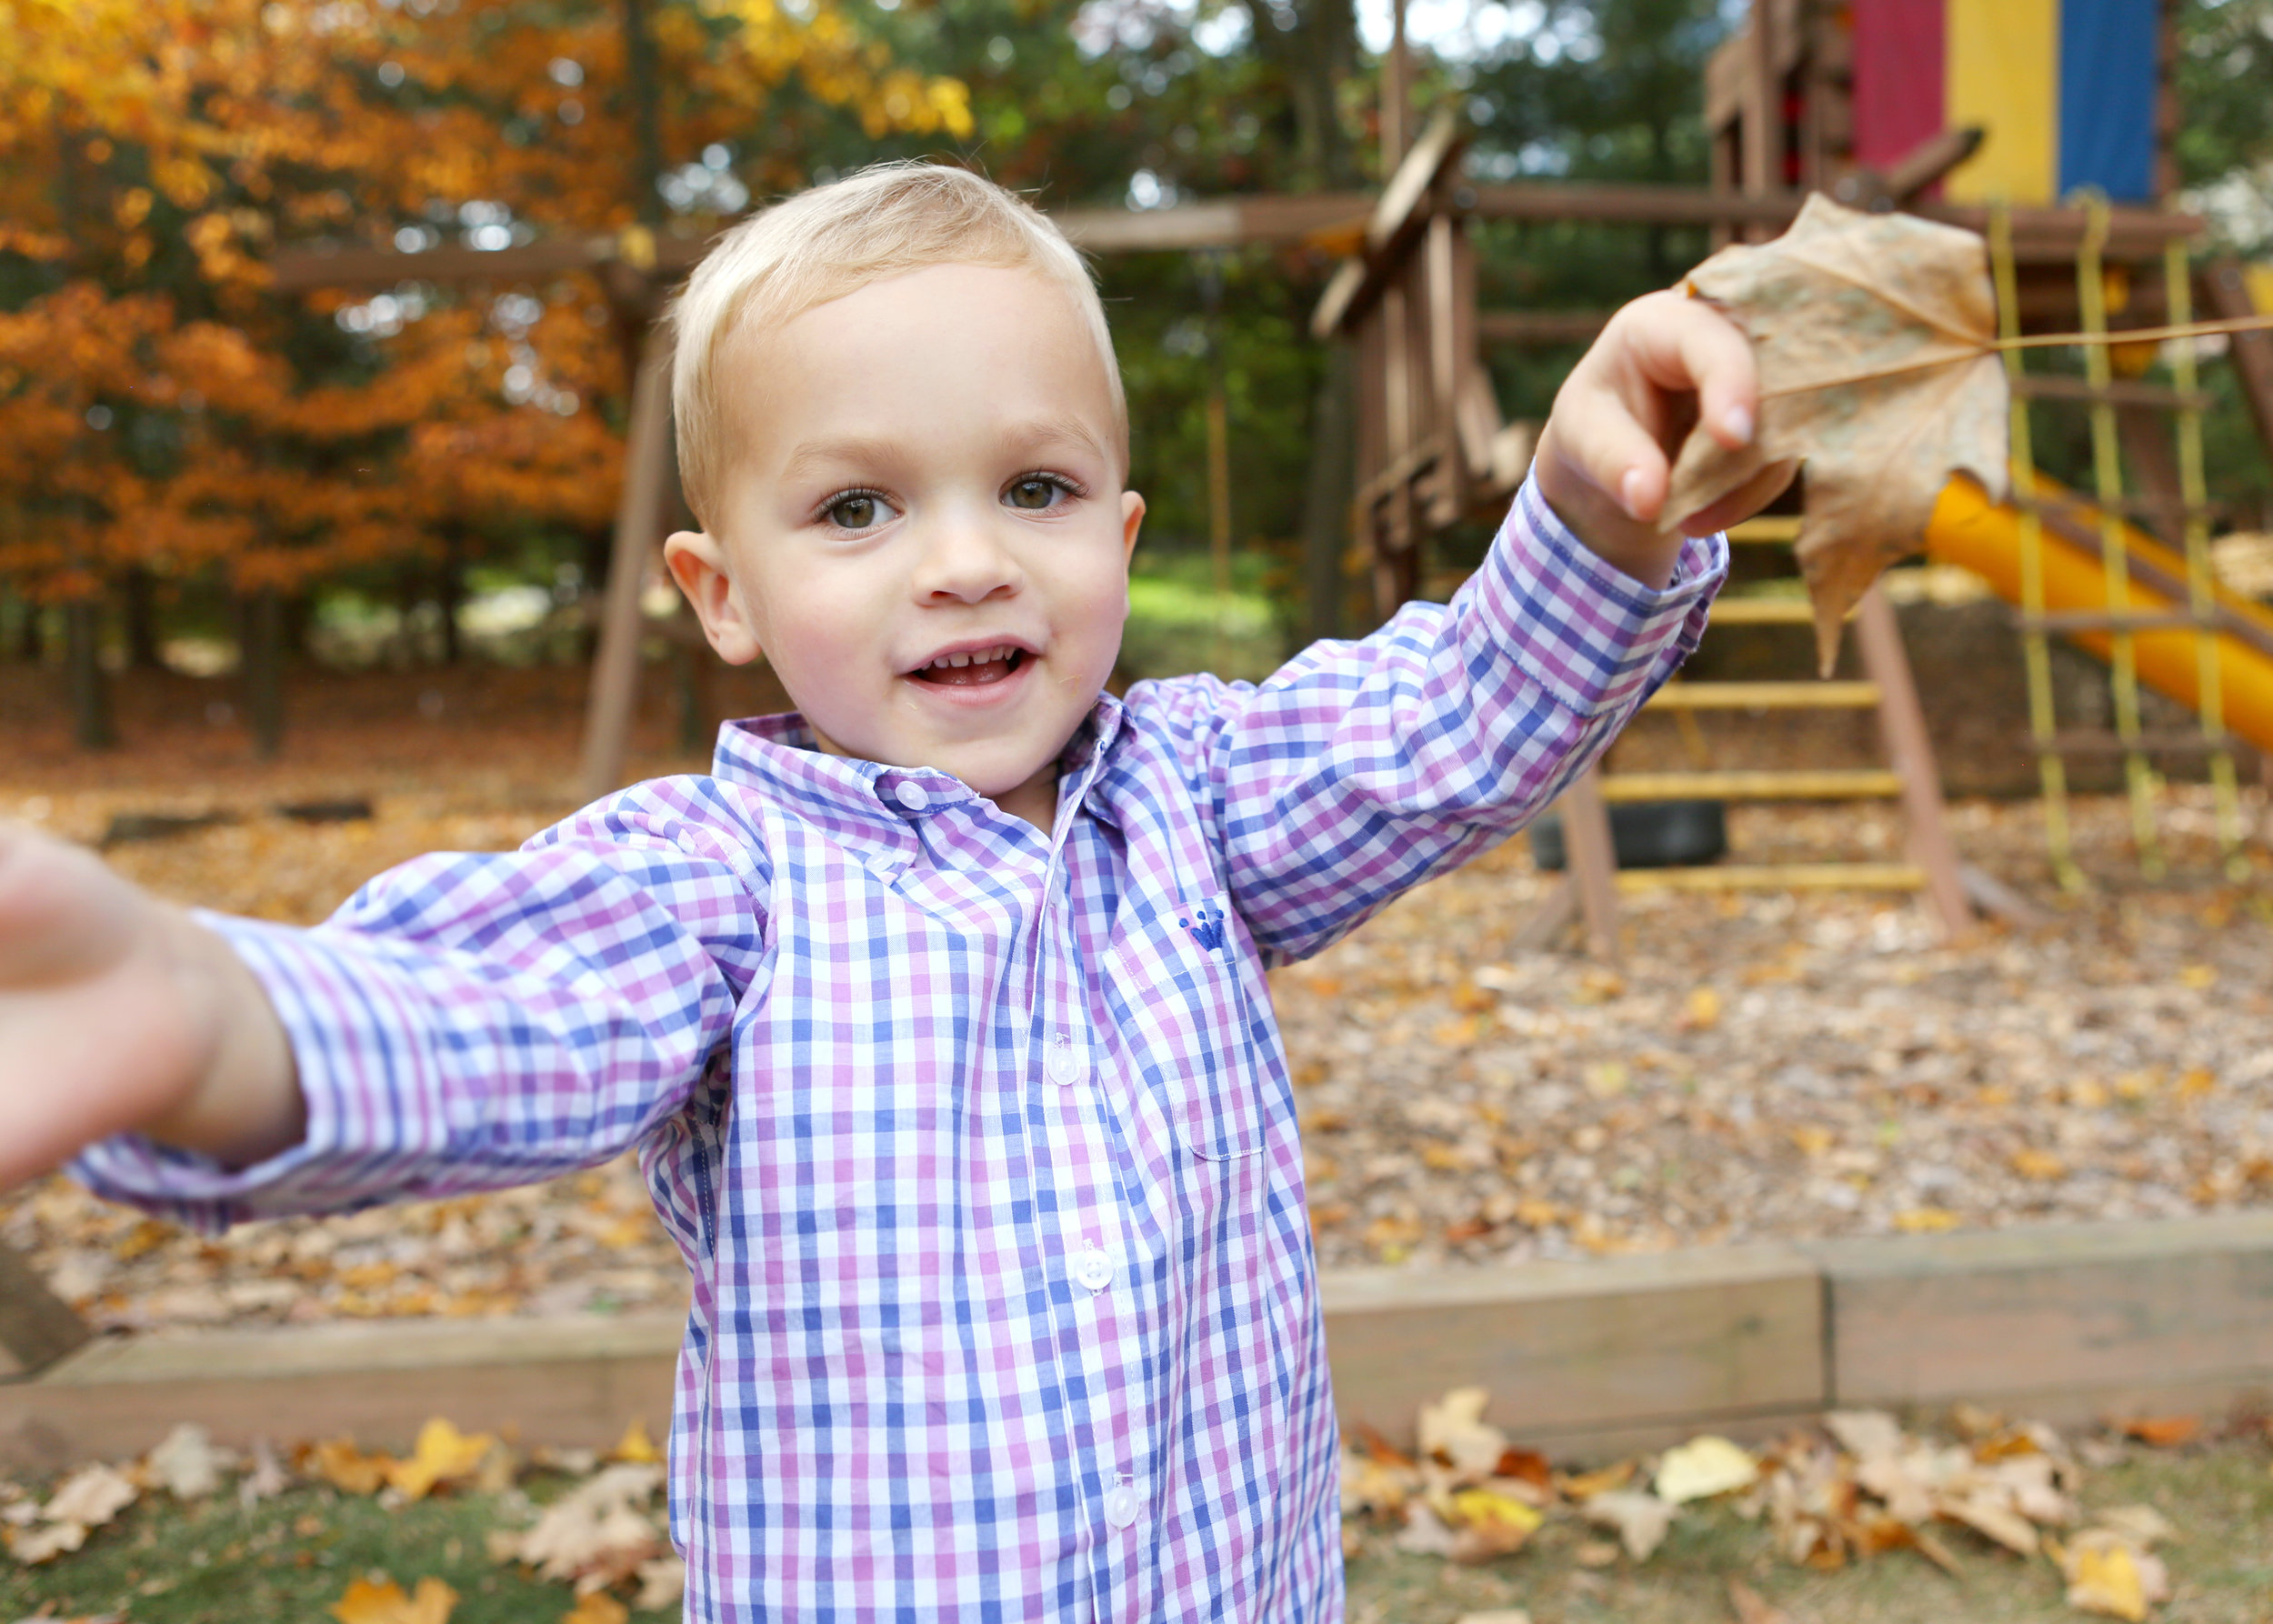 NJ and NYC based lifestyle photographer | Jennifer Lavelle Photography |  children and families, newborn, lifestyle, interiors, food and travel.  Boy throwing leaves.